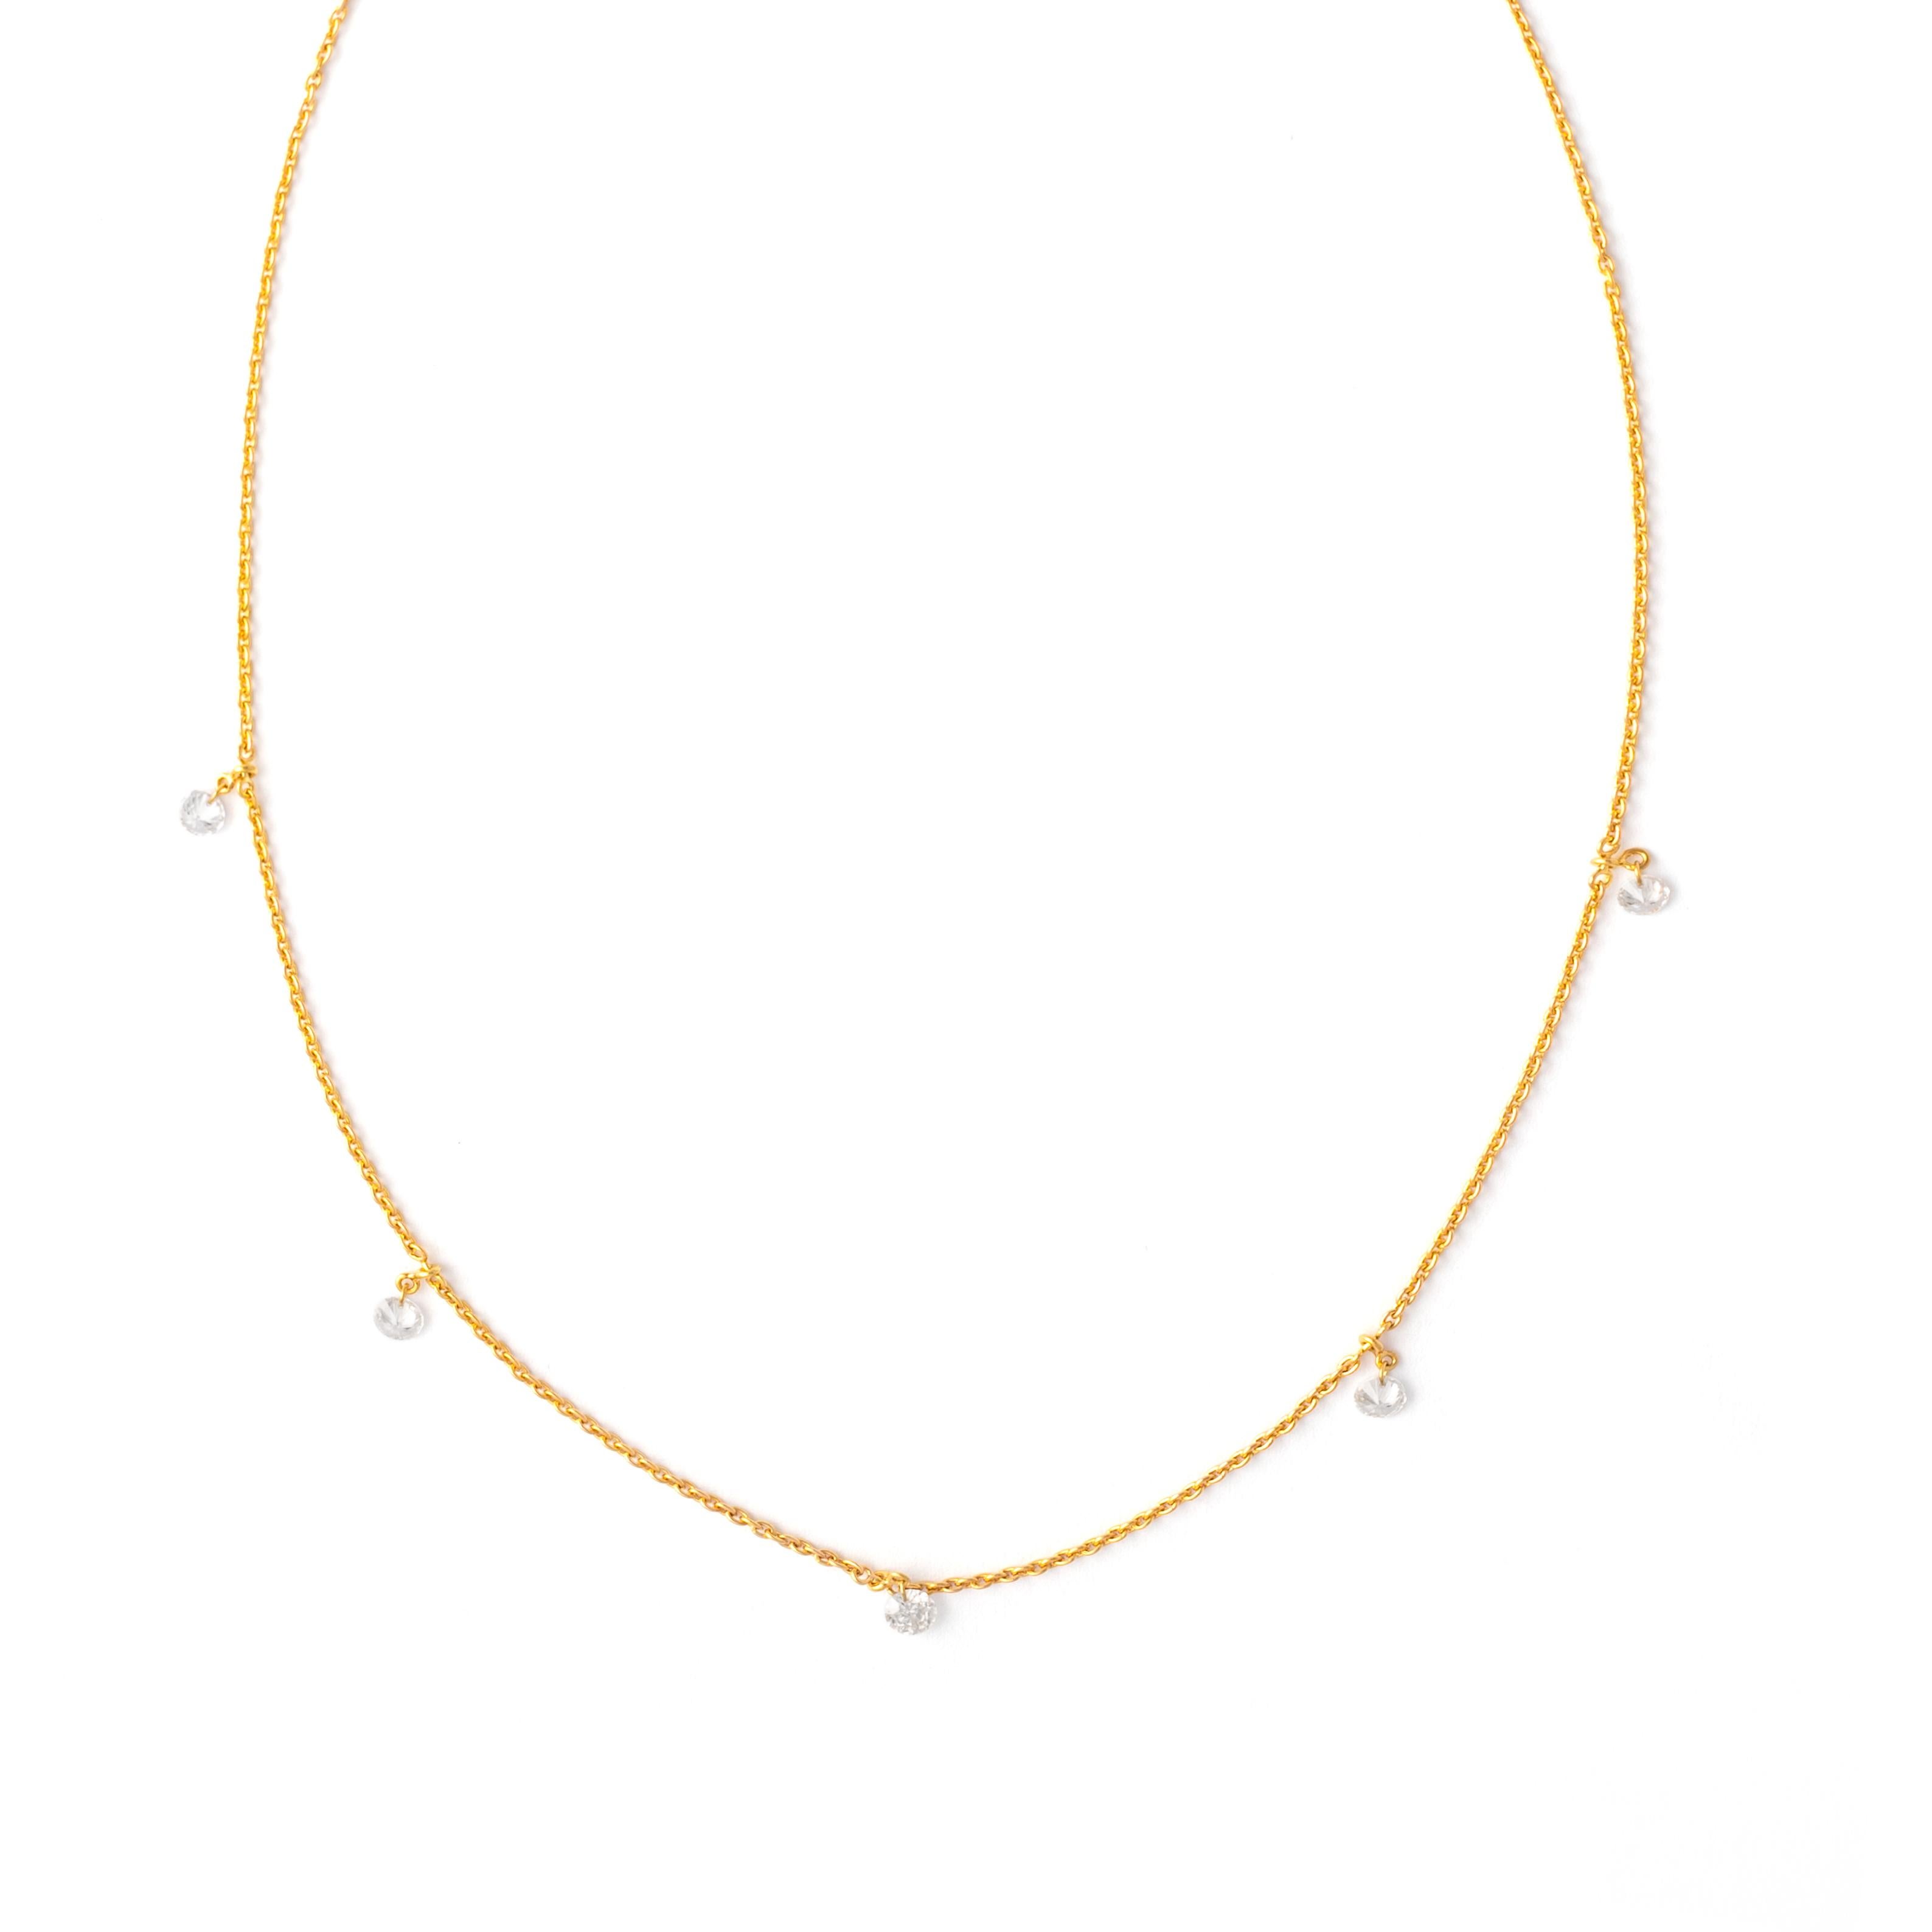 Necklace 18K yellow gold Natural Diamond Round cut G / VS. 
Total 0.42 carat.
Length: Approx. 45 centimeters.